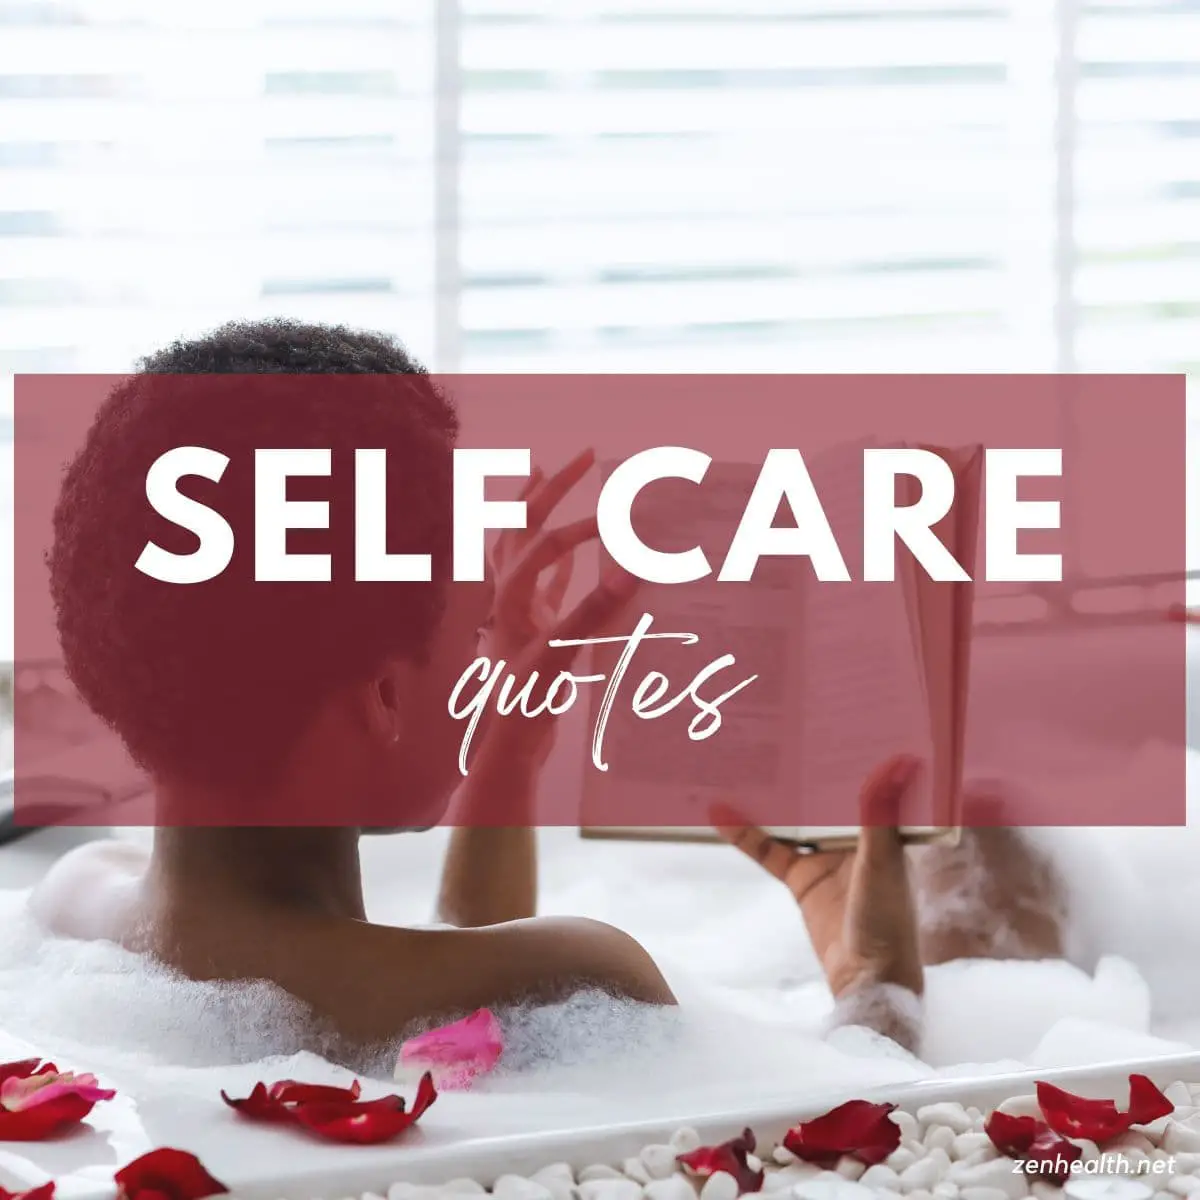 self care quotes text overlay on a woman sitting in a bubble bath reading with red petals scattered close by